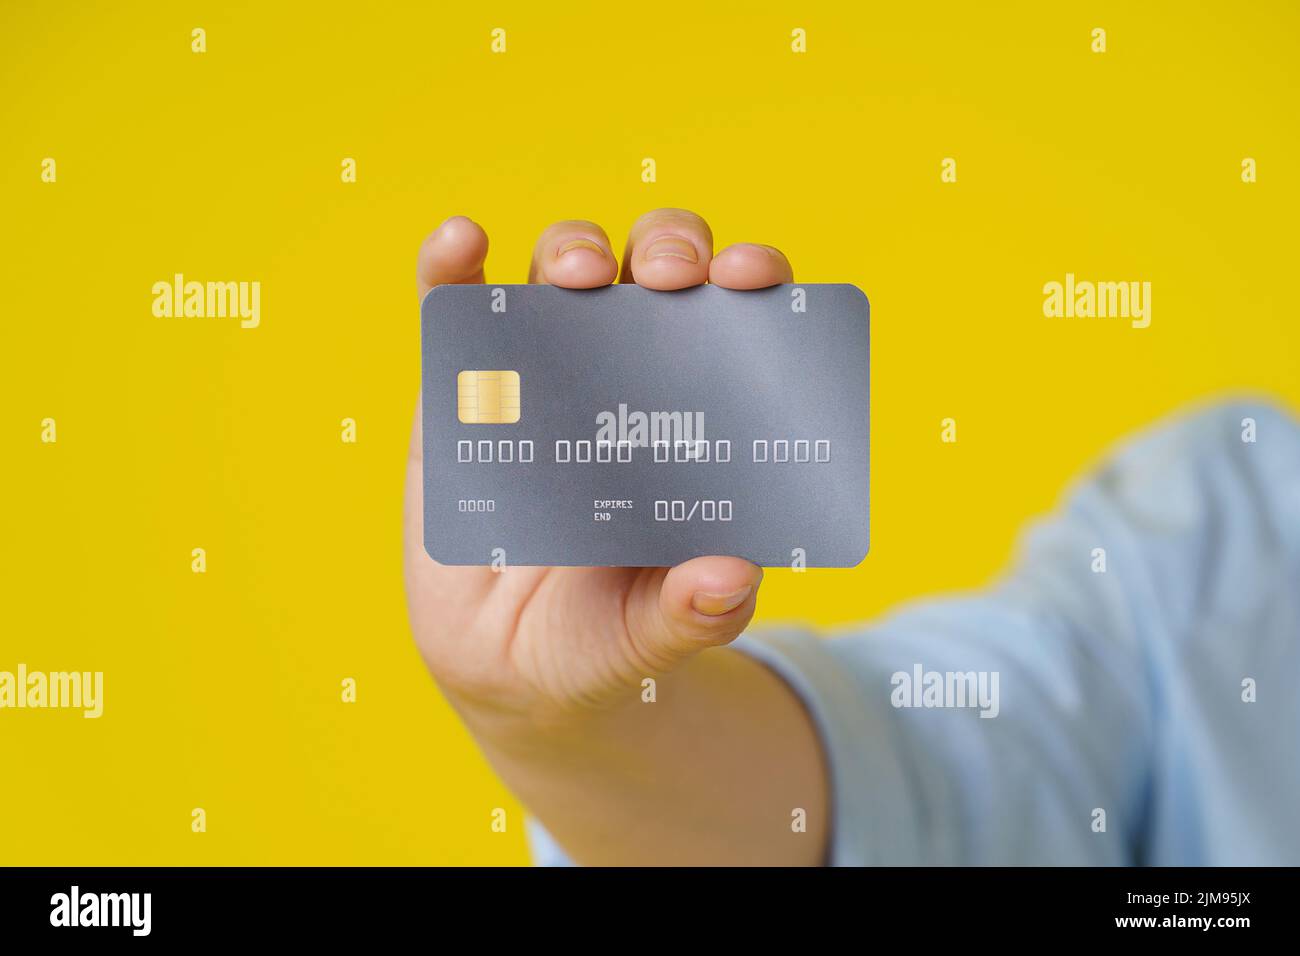 Credit, debit cad close up in hand of mature woman showing it on camera, customer online payment or shopping online, isolated on yellow background. E-commerce, online banking concept. Stock Photo